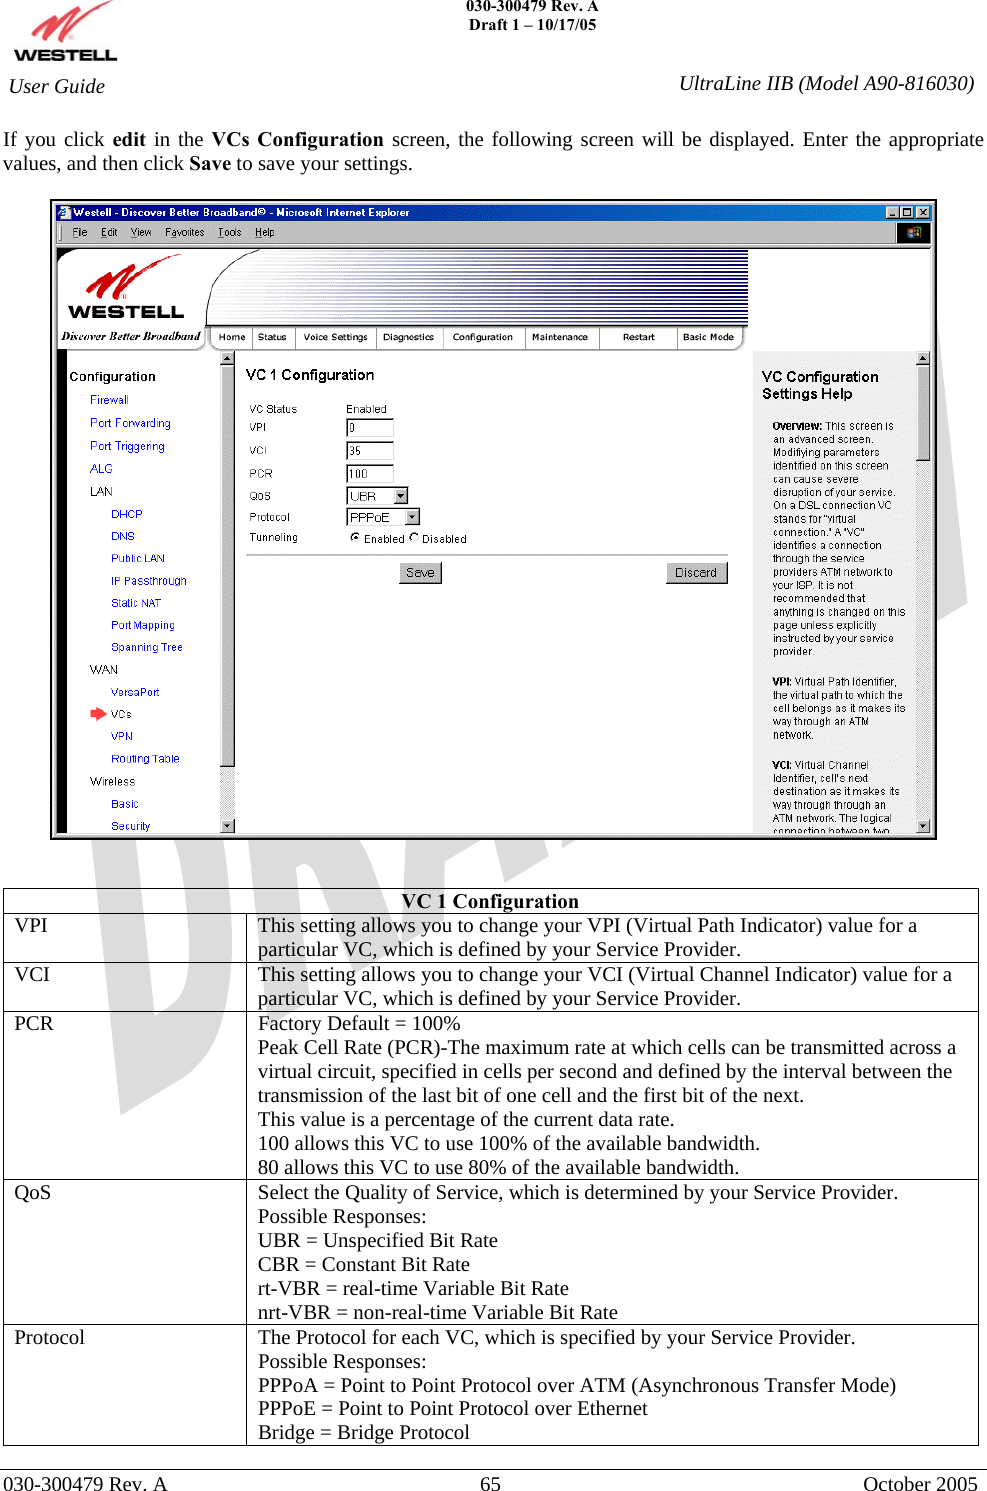    030-300479 Rev. A Draft 1 – 10/17/05   030-300479 Rev. A  65  October 2005  User Guide  UltraLine IIB (Model A90-816030)If you click edit in the VCs Configuration screen, the following screen will be displayed. Enter the appropriate values, and then click Save to save your settings.     VC 1 Configuration VPI  This setting allows you to change your VPI (Virtual Path Indicator) value for a particular VC, which is defined by your Service Provider. VCI  This setting allows you to change your VCI (Virtual Channel Indicator) value for a particular VC, which is defined by your Service Provider. PCR  Factory Default = 100% Peak Cell Rate (PCR)-The maximum rate at which cells can be transmitted across a virtual circuit, specified in cells per second and defined by the interval between the transmission of the last bit of one cell and the first bit of the next. This value is a percentage of the current data rate. 100 allows this VC to use 100% of the available bandwidth. 80 allows this VC to use 80% of the available bandwidth. QoS  Select the Quality of Service, which is determined by your Service Provider. Possible Responses: UBR = Unspecified Bit Rate CBR = Constant Bit Rate rt-VBR = real-time Variable Bit Rate nrt-VBR = non-real-time Variable Bit Rate Protocol  The Protocol for each VC, which is specified by your Service Provider. Possible Responses: PPPoA = Point to Point Protocol over ATM (Asynchronous Transfer Mode) PPPoE = Point to Point Protocol over Ethernet Bridge = Bridge Protocol 